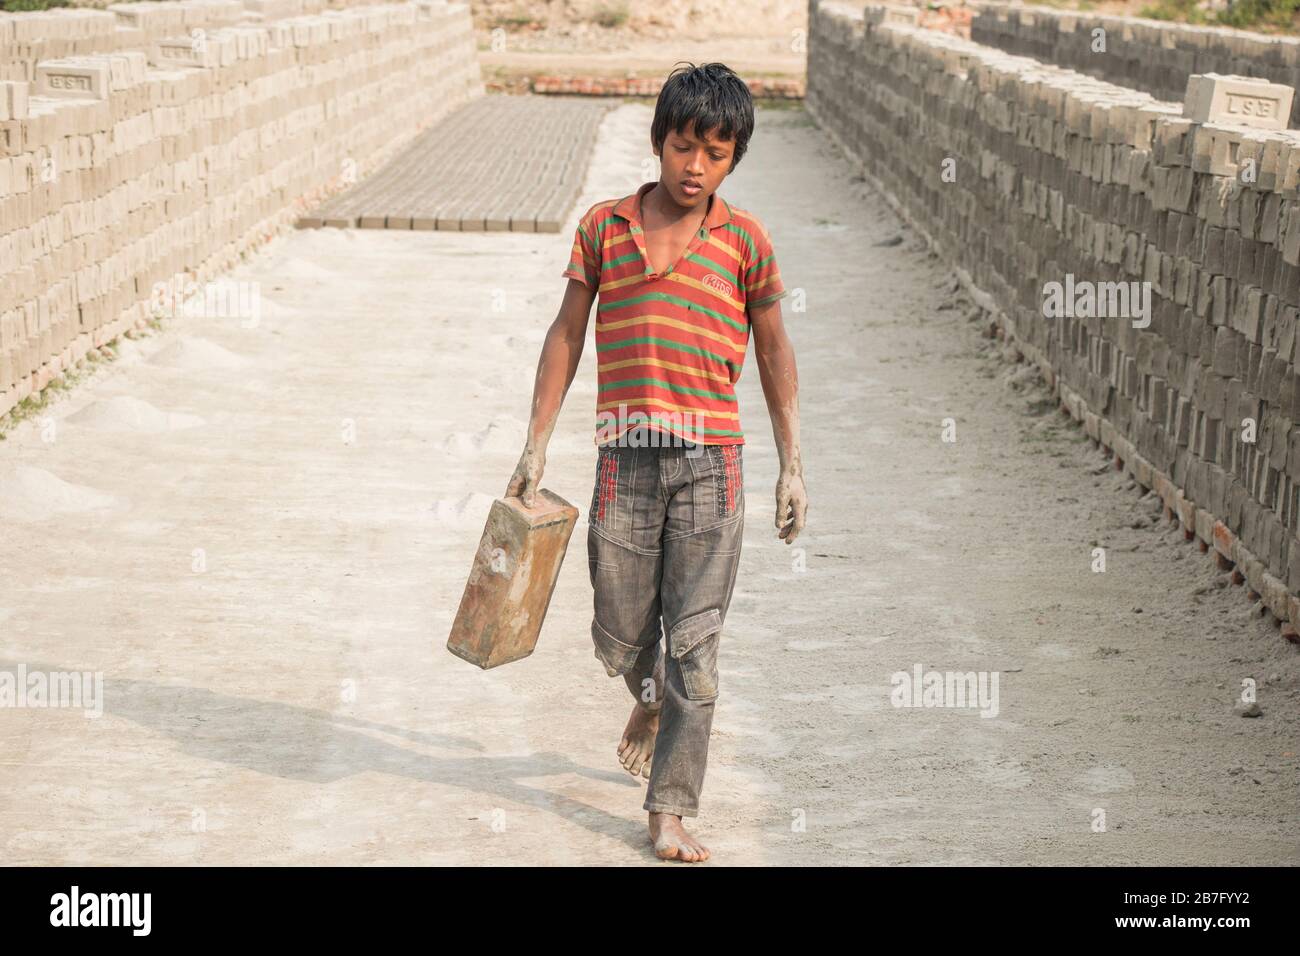 A Bangladesh child labor is working in a brick filed under a sunny day. Though child labor is restricted in this industry but he is working for food. Stock Photo